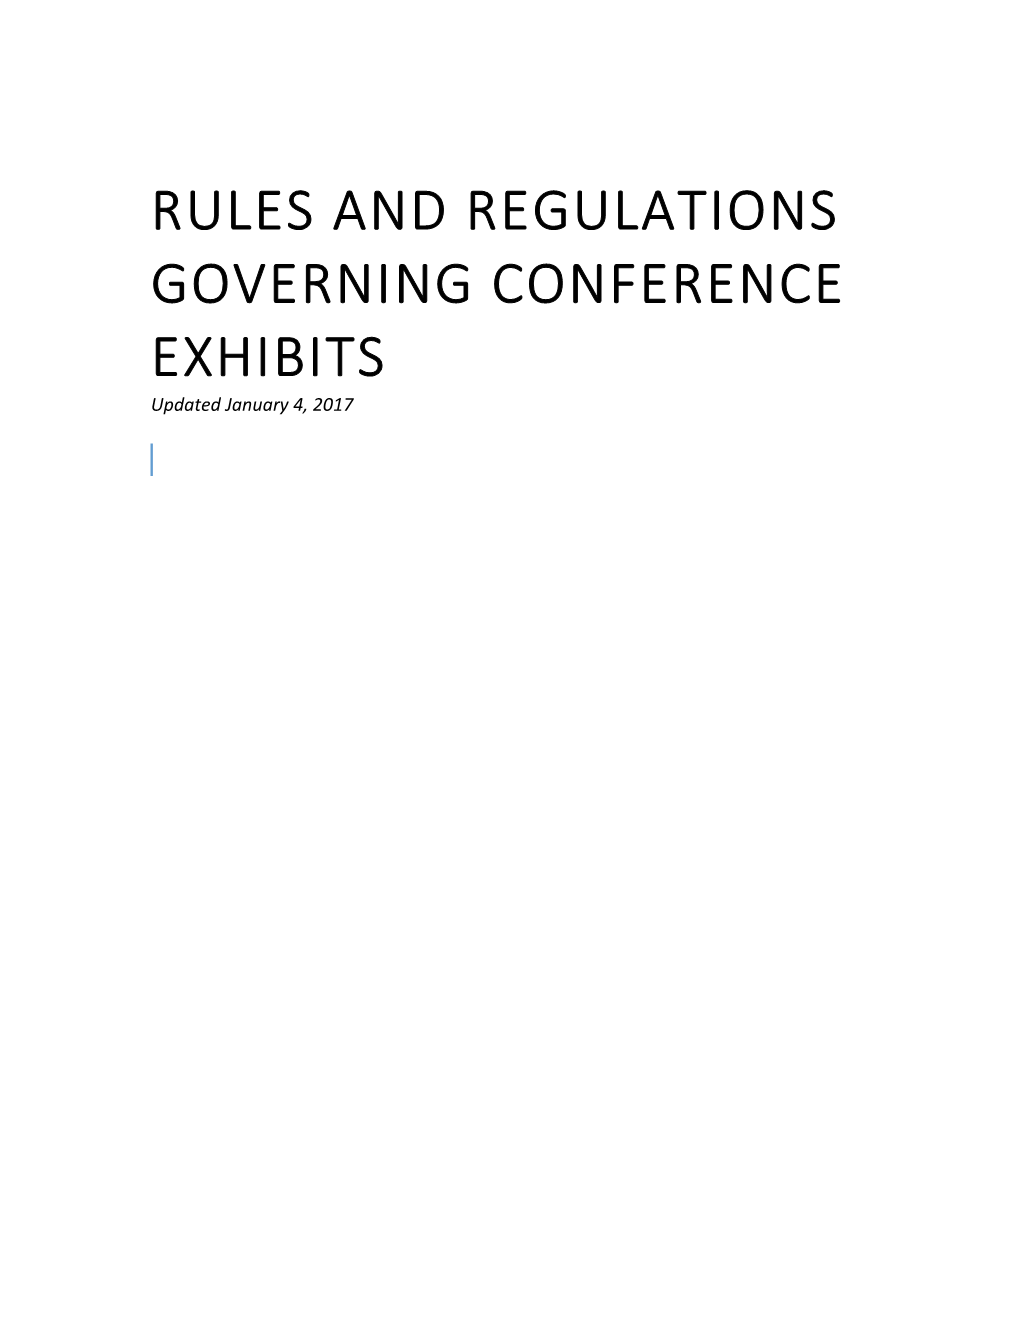 Rules and Regulations Governing Conference Exhibits